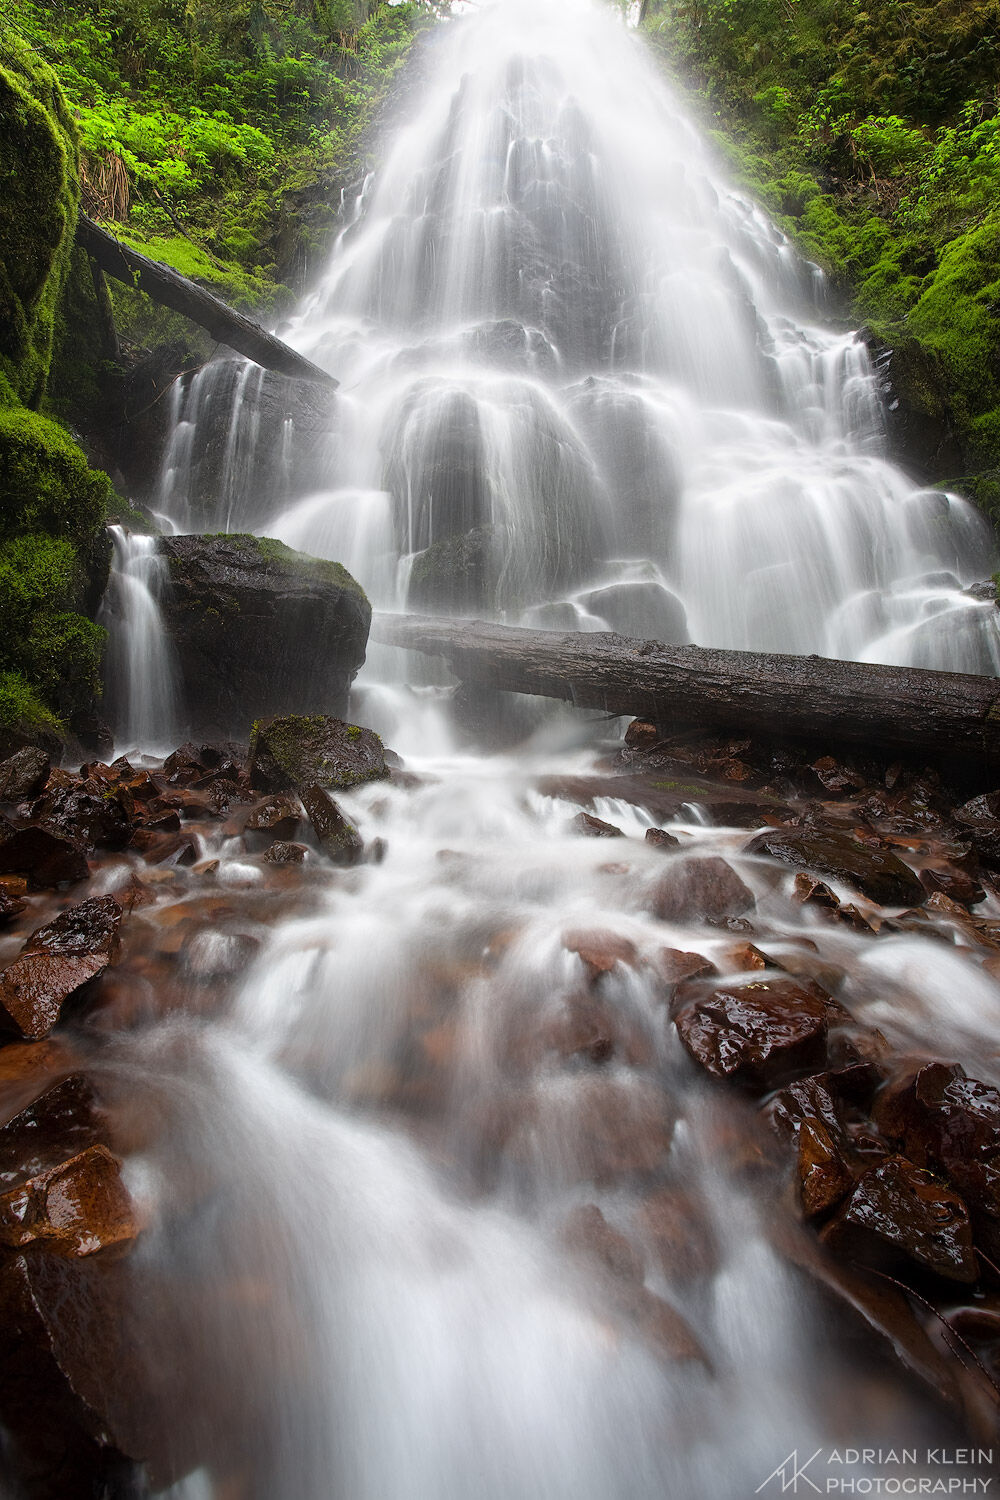 The small yet magically beautiful Fair Falls in the Columbia River Gorge, Oregon. Limited Edition of 50.